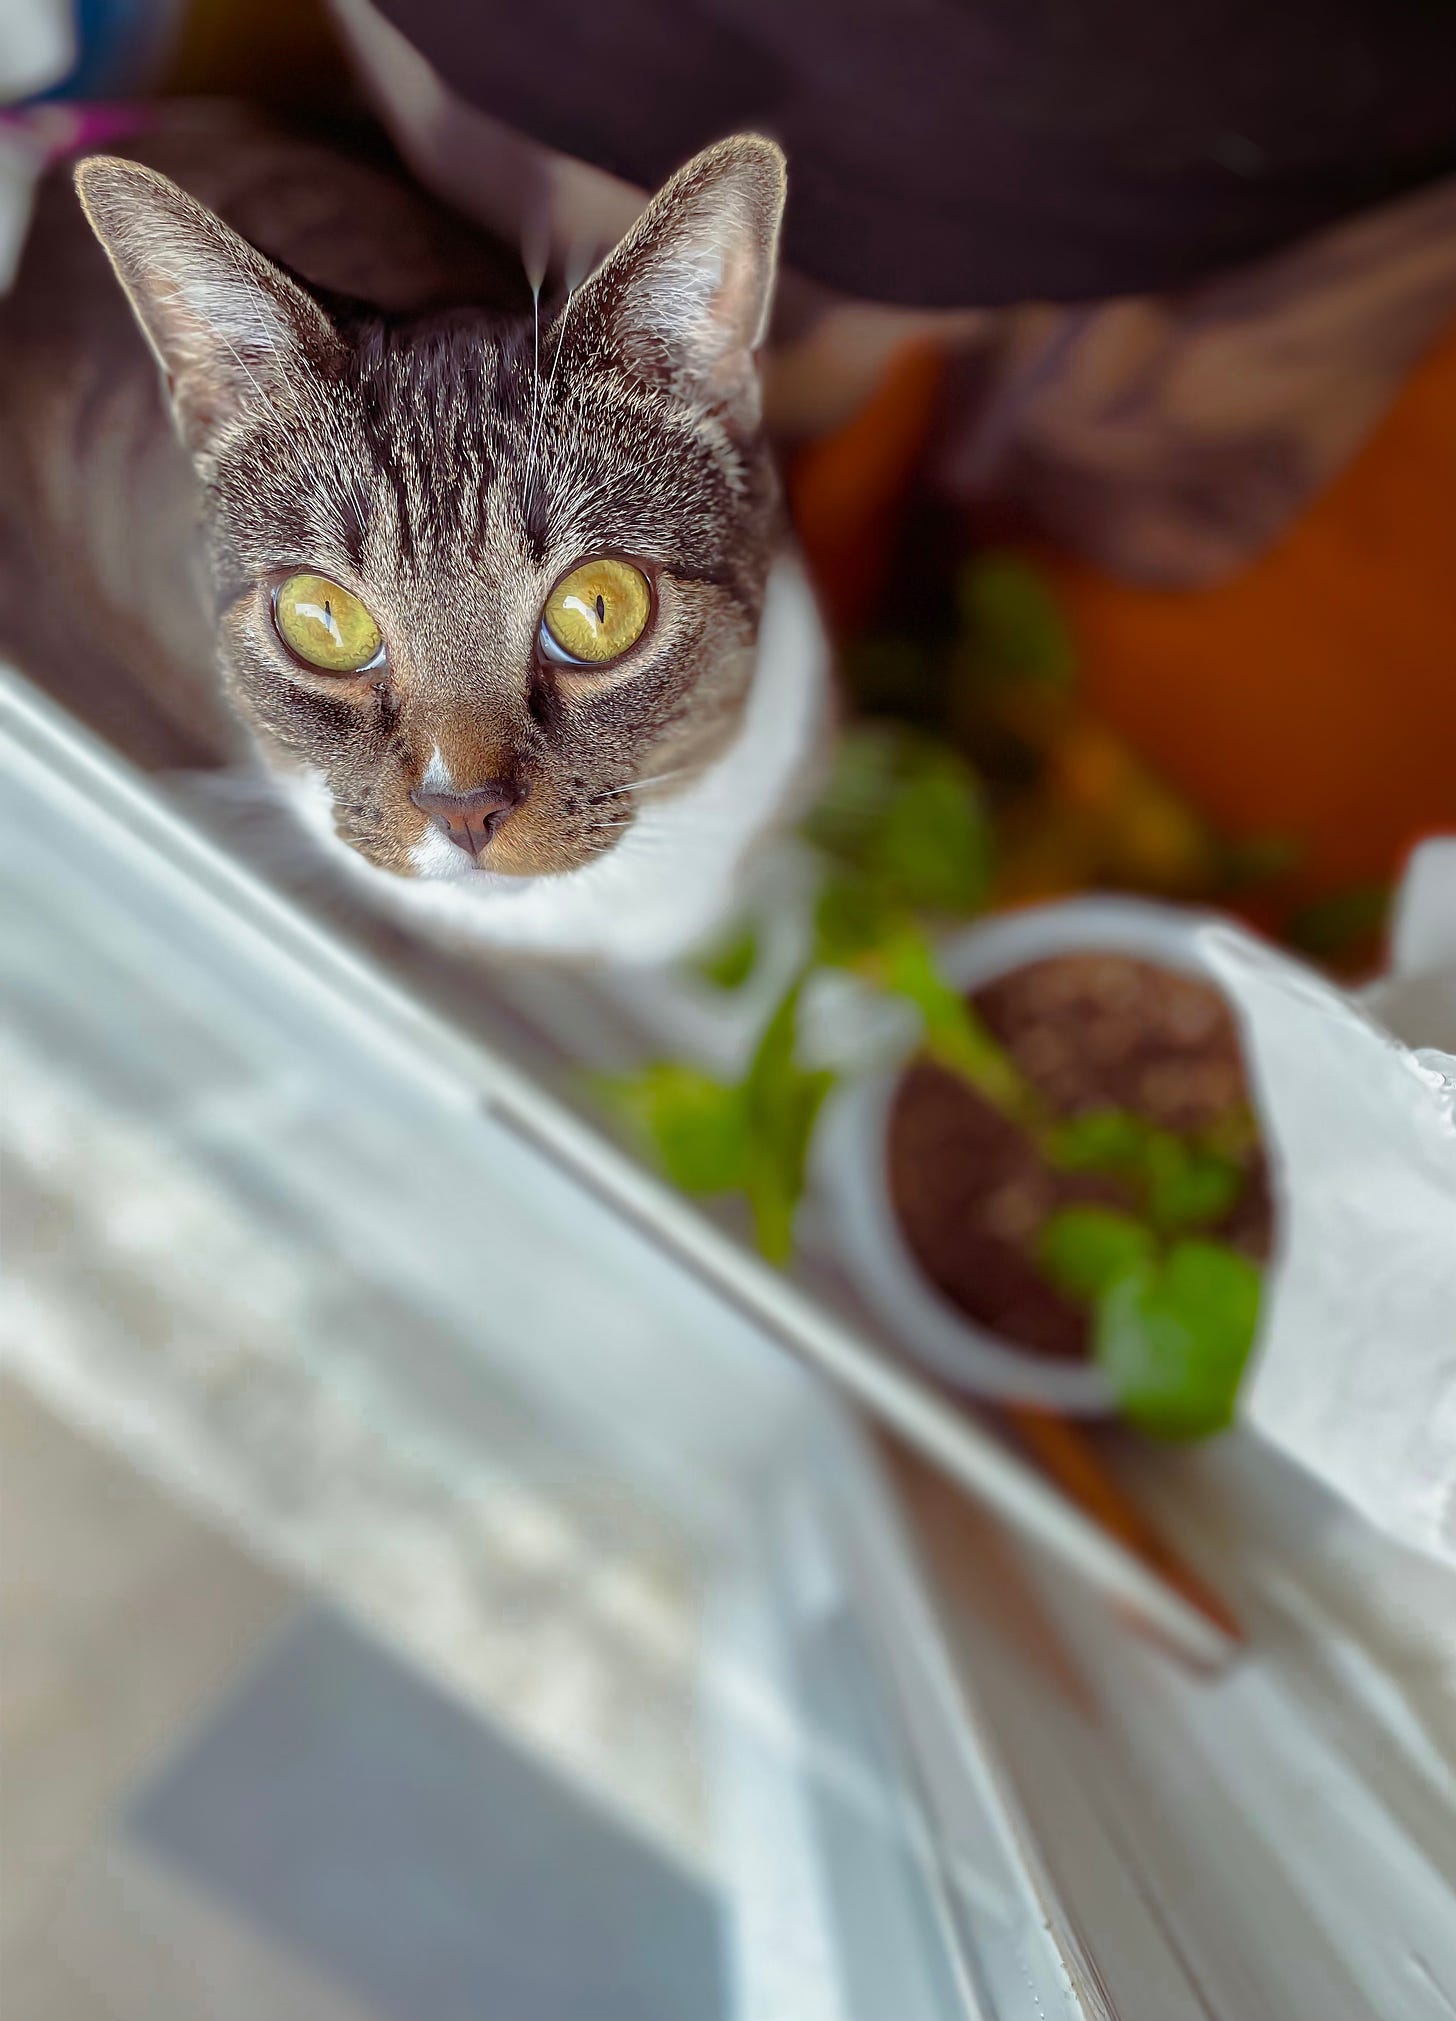 Harry, a grey and white cat, looks up at the camera from his spot on a windowsill next to a potted plant.